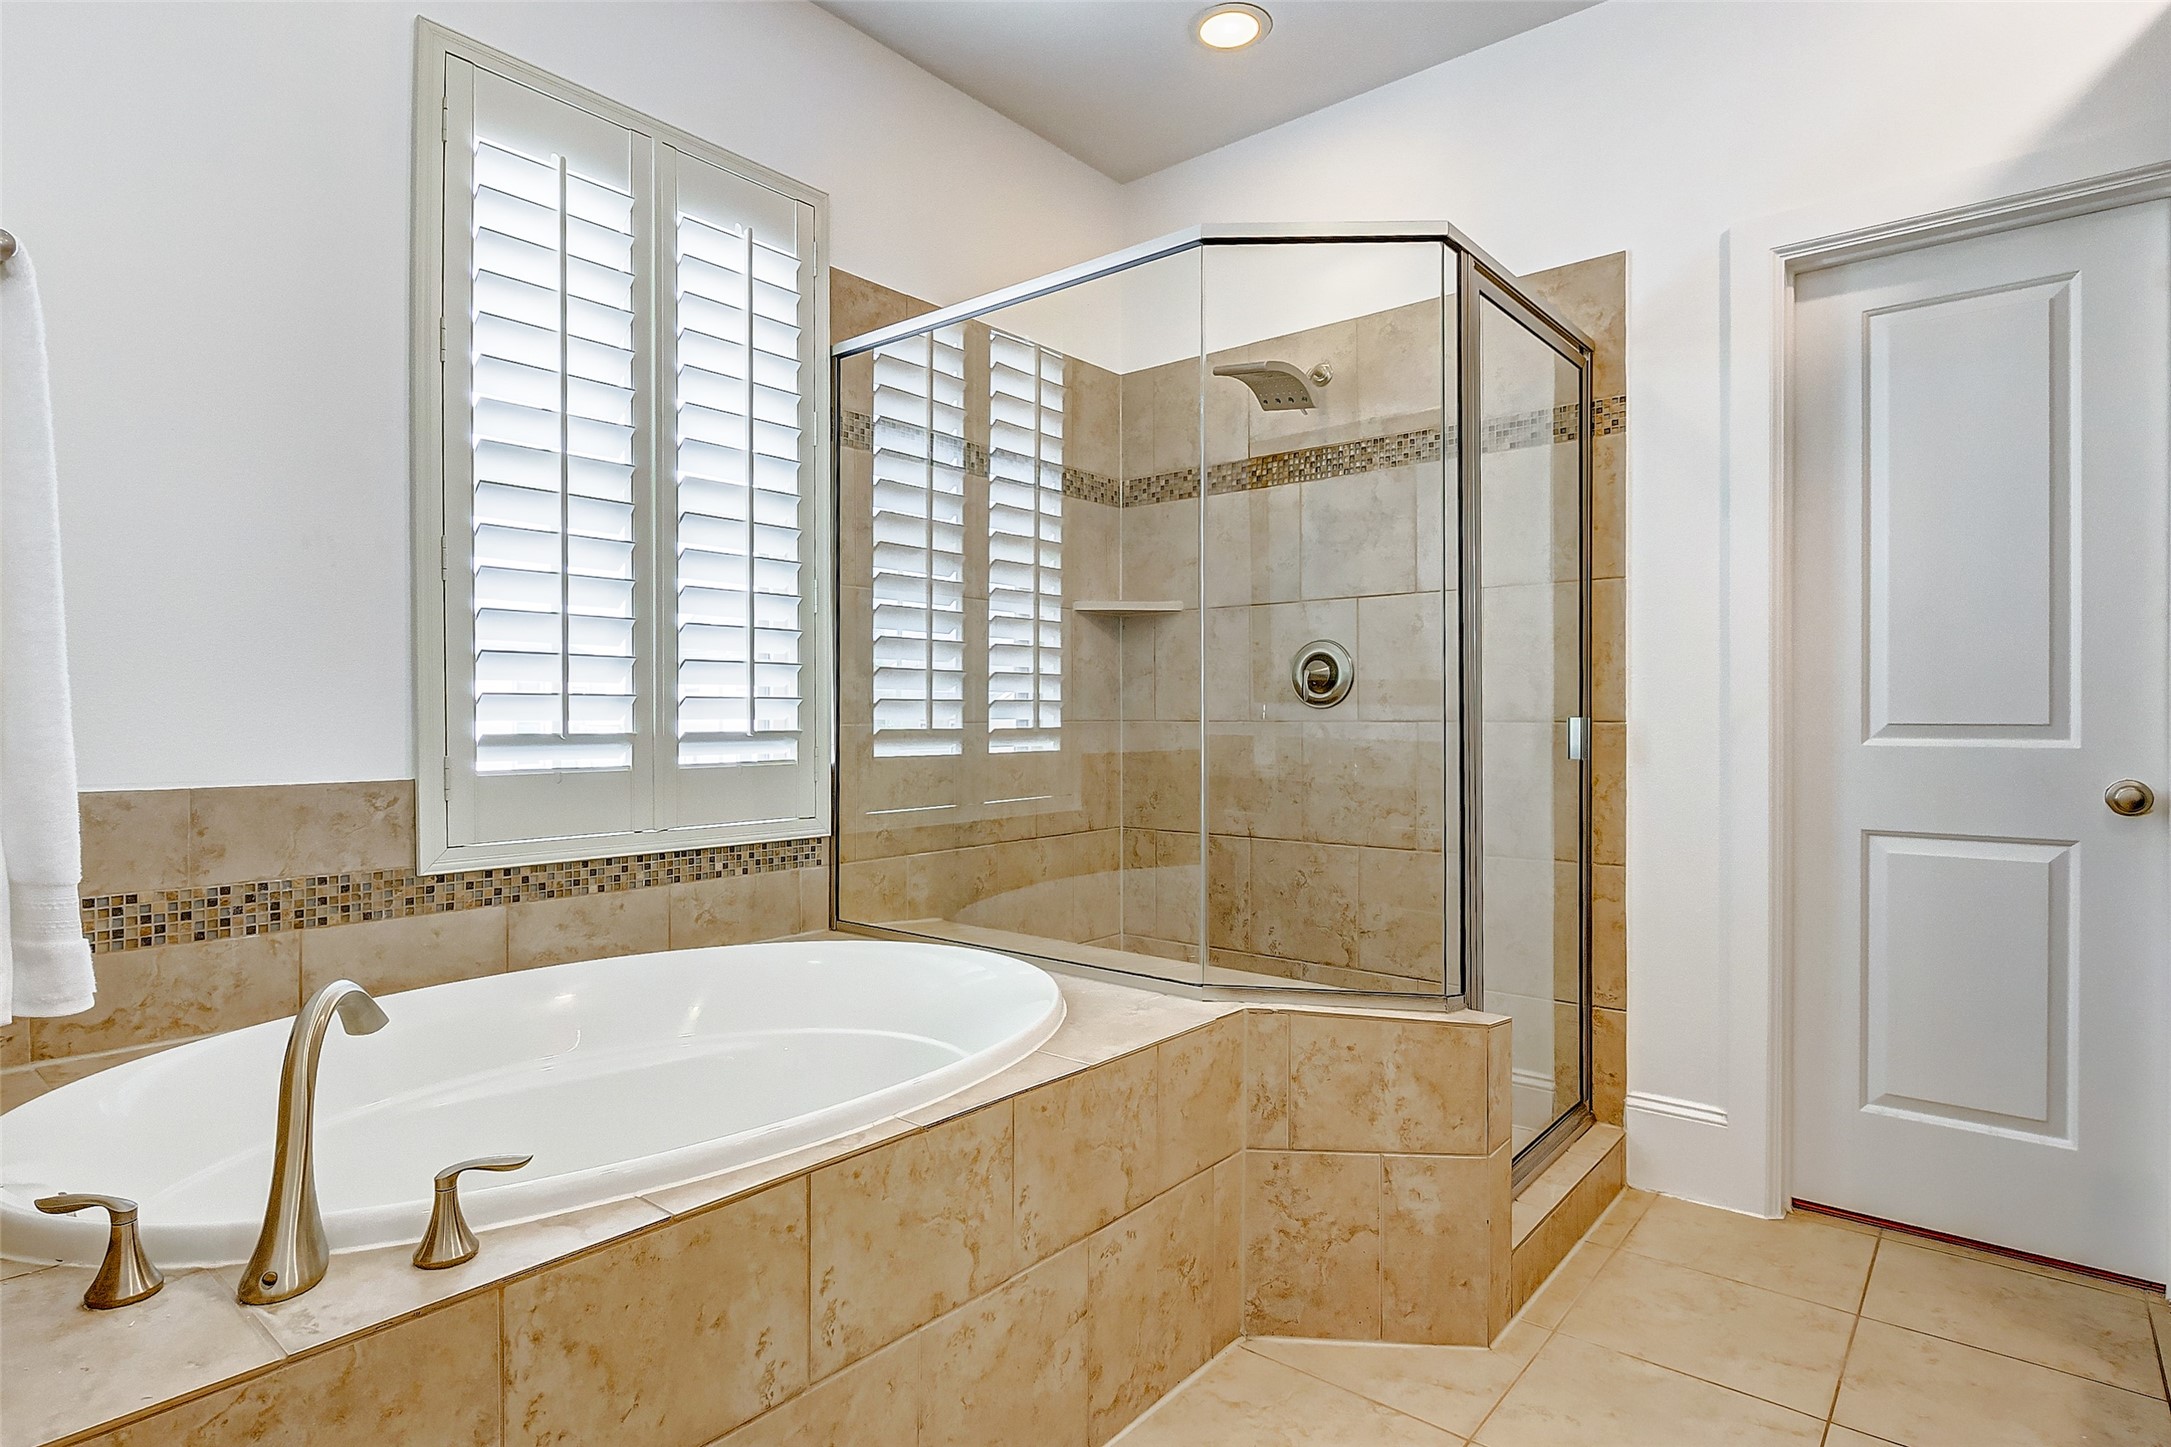 Your new primary ensuite offers a garden tub and separate stand-up glass shower with matching tub and shower surround, brushed nickel fixtures, and shower lighting.